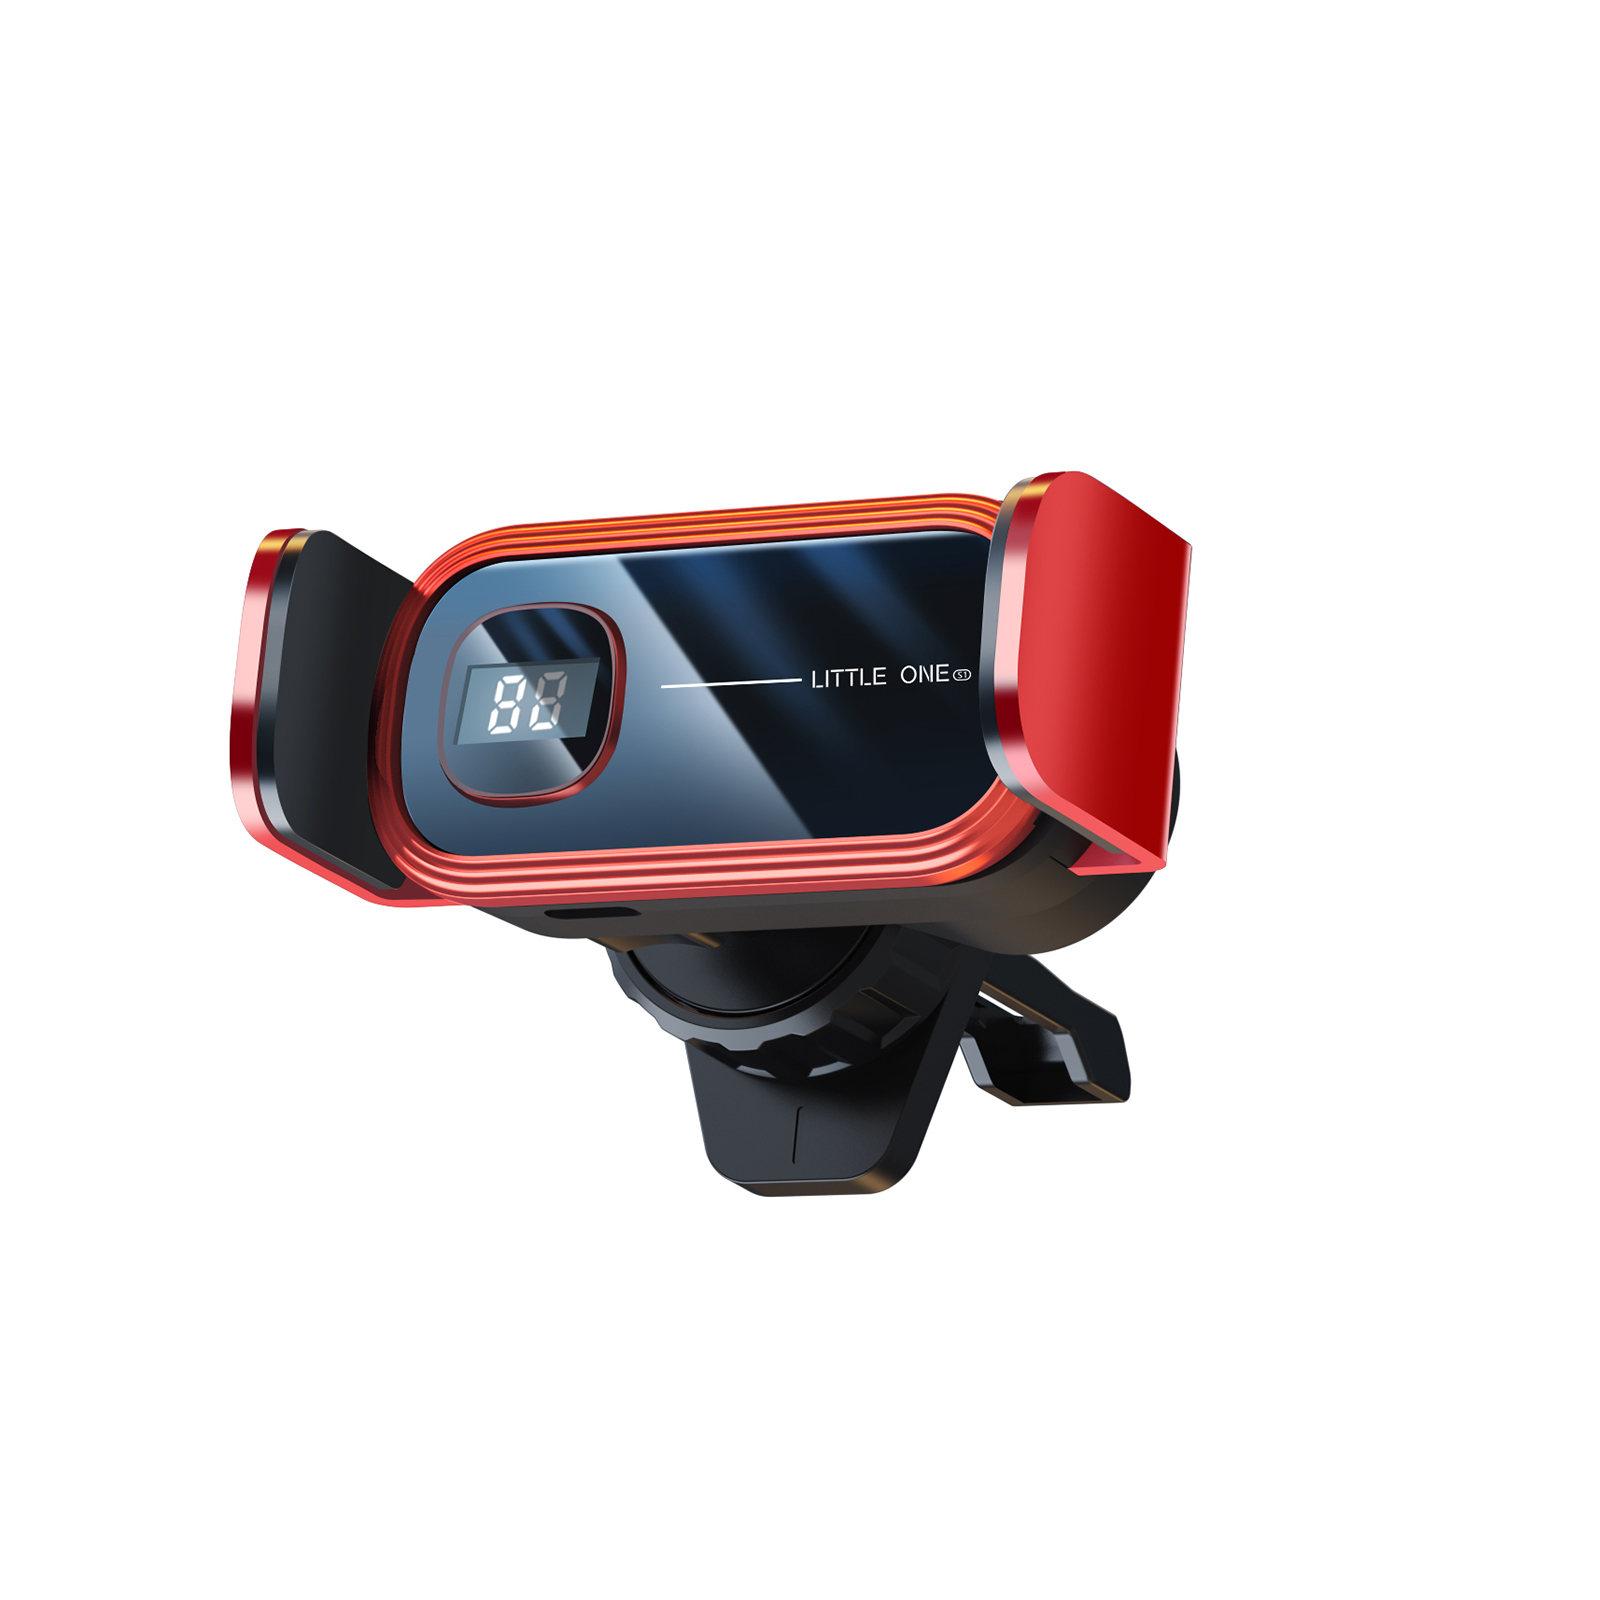 Smart Electric Locking Car Phone Holder 360-degree Rotation Digital Display Air Vent Clip Phone Stand Mount Bracket Red - Air Outlet